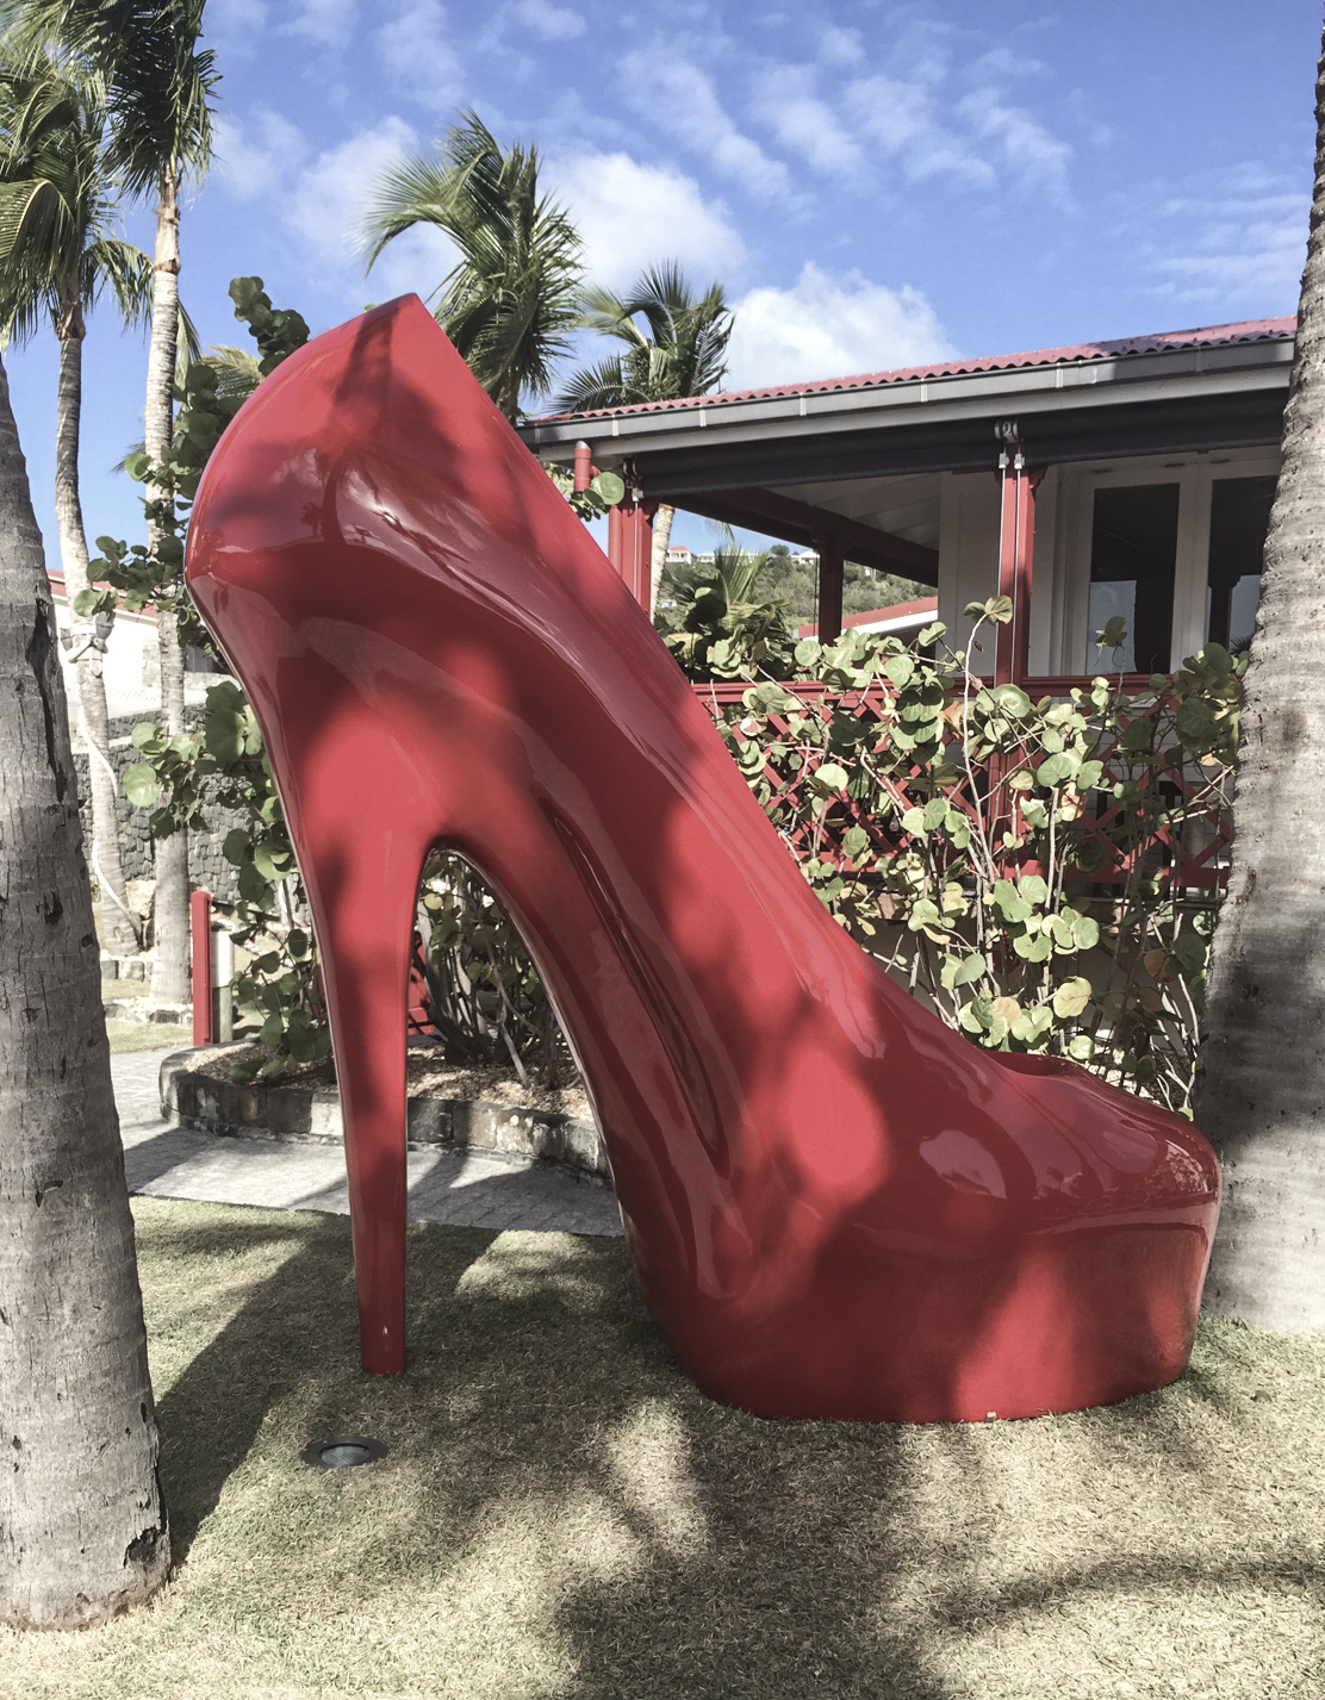 Slaves to fashion | St Barths is heating up - CIVILIAN